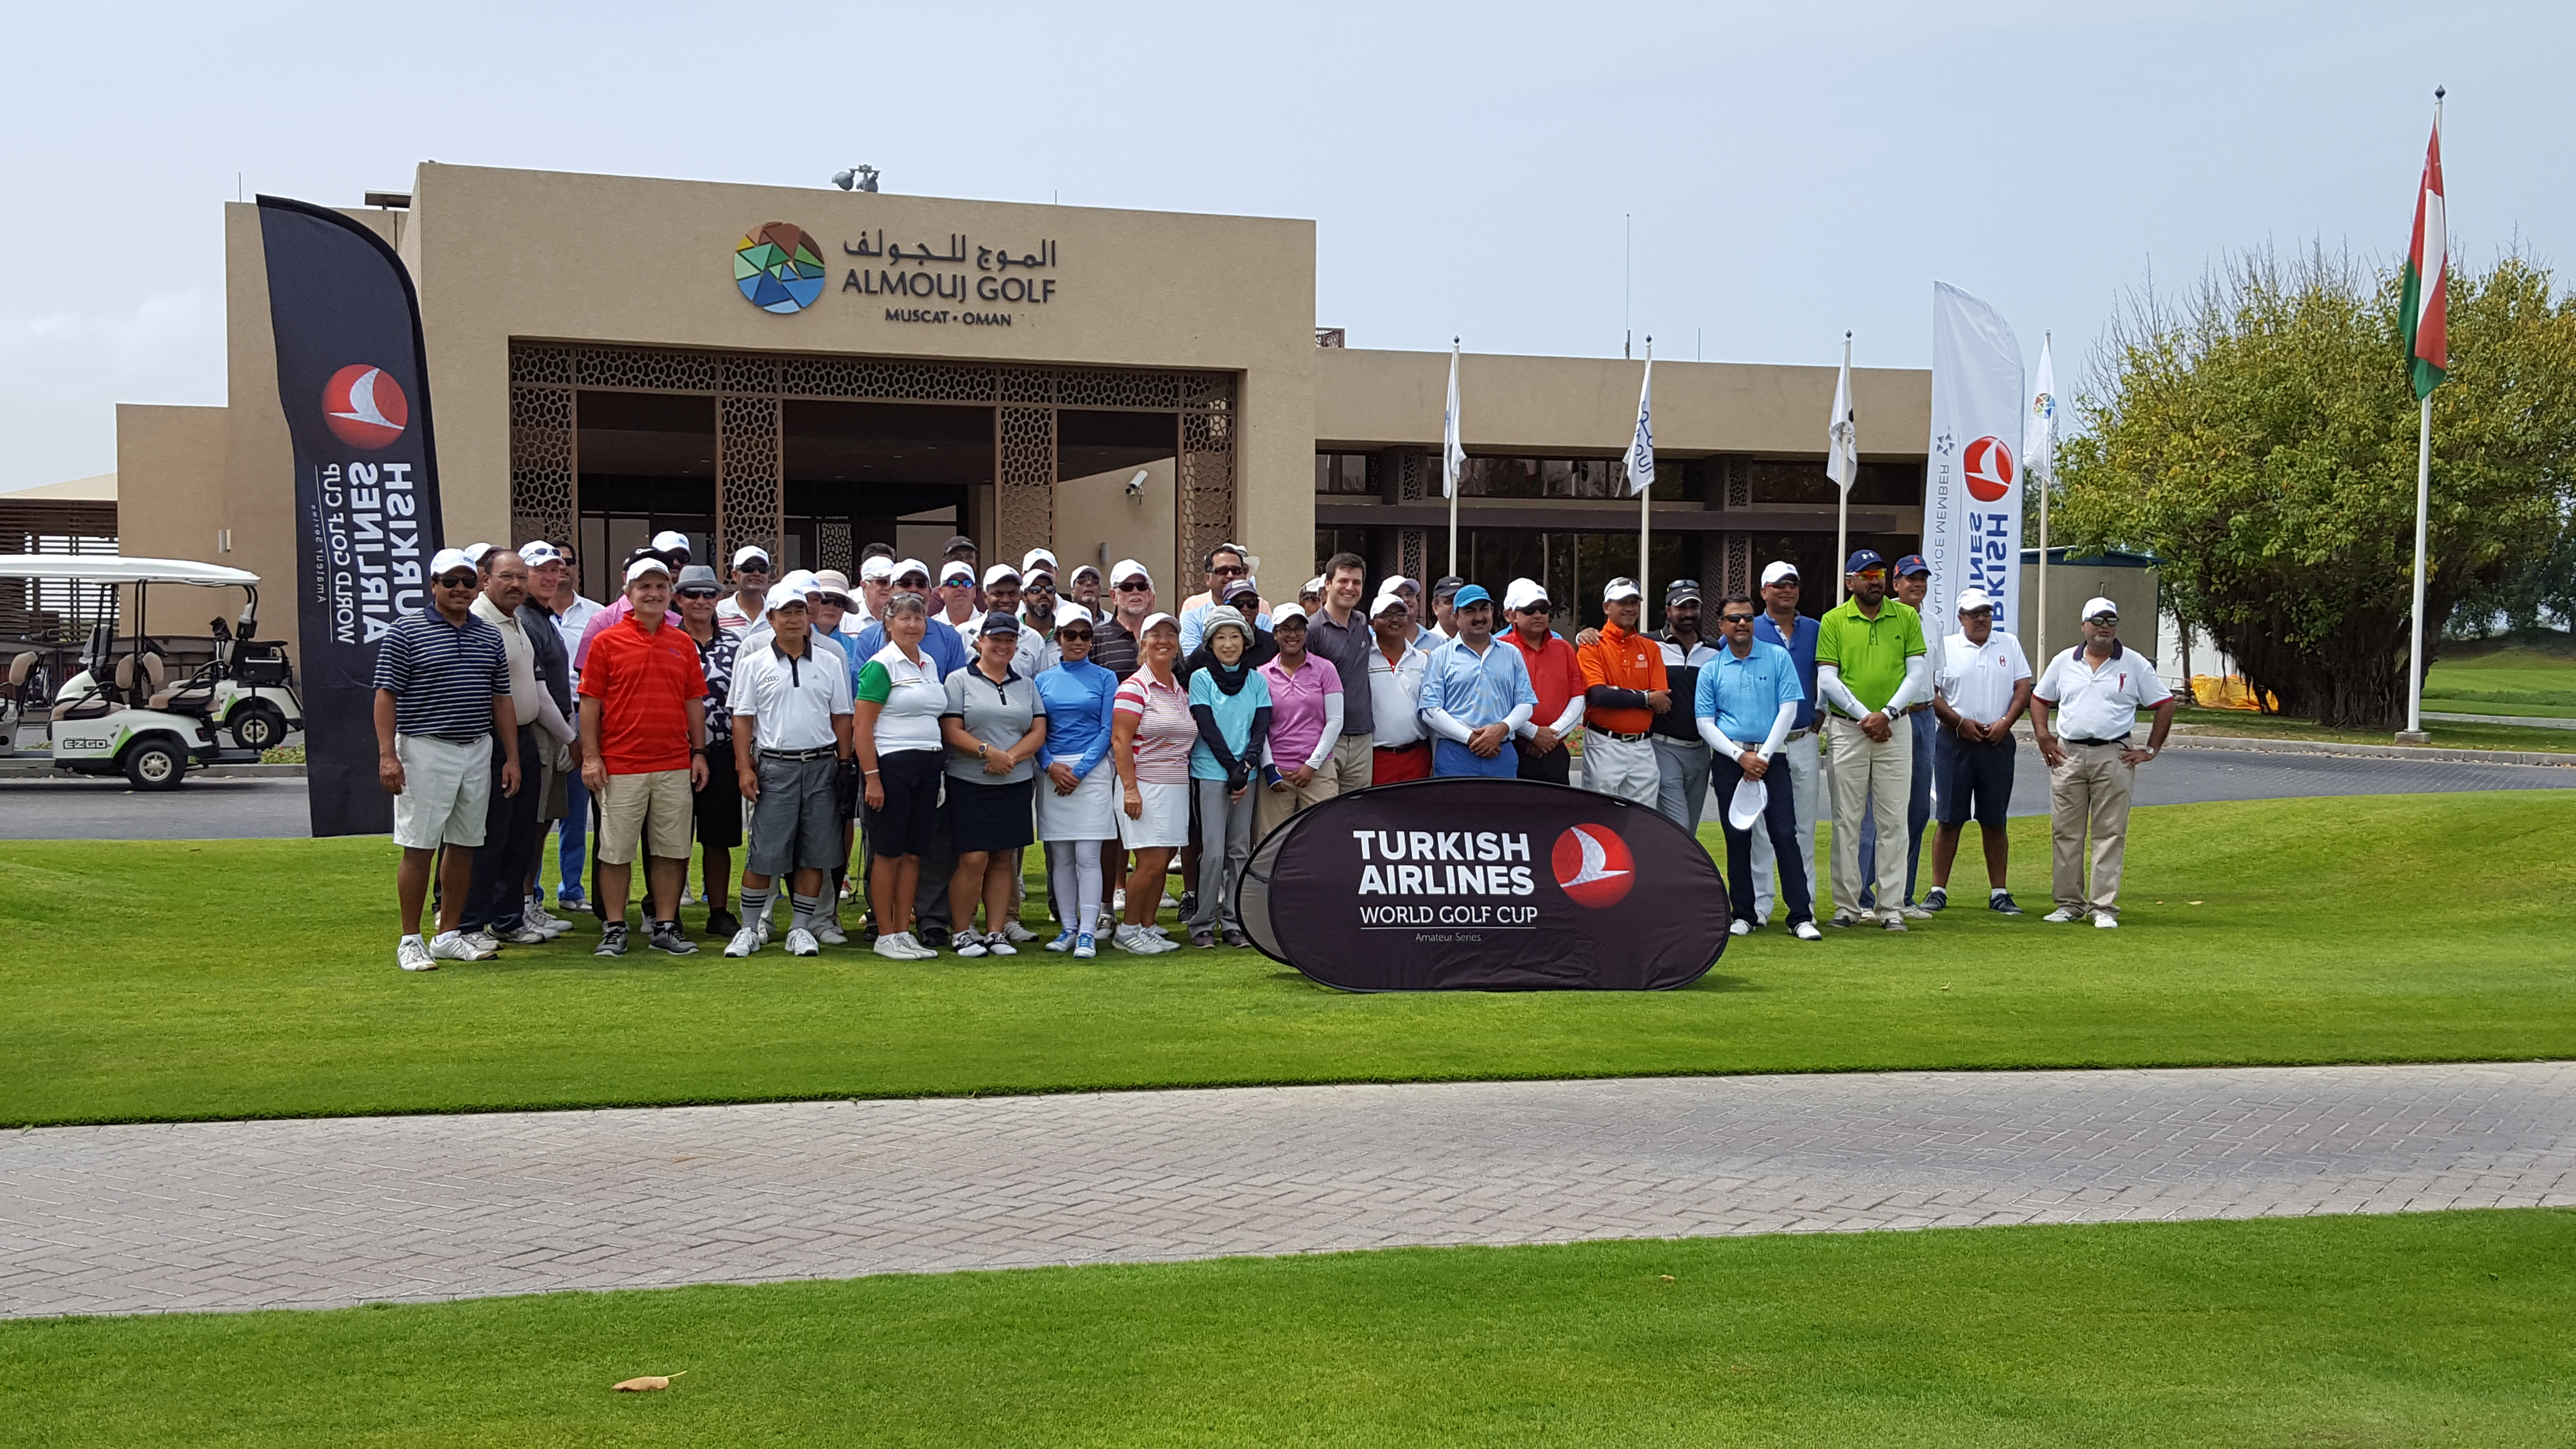 Oman Golf: Vishal qualifies for Turkish Airlines World Golf Cup